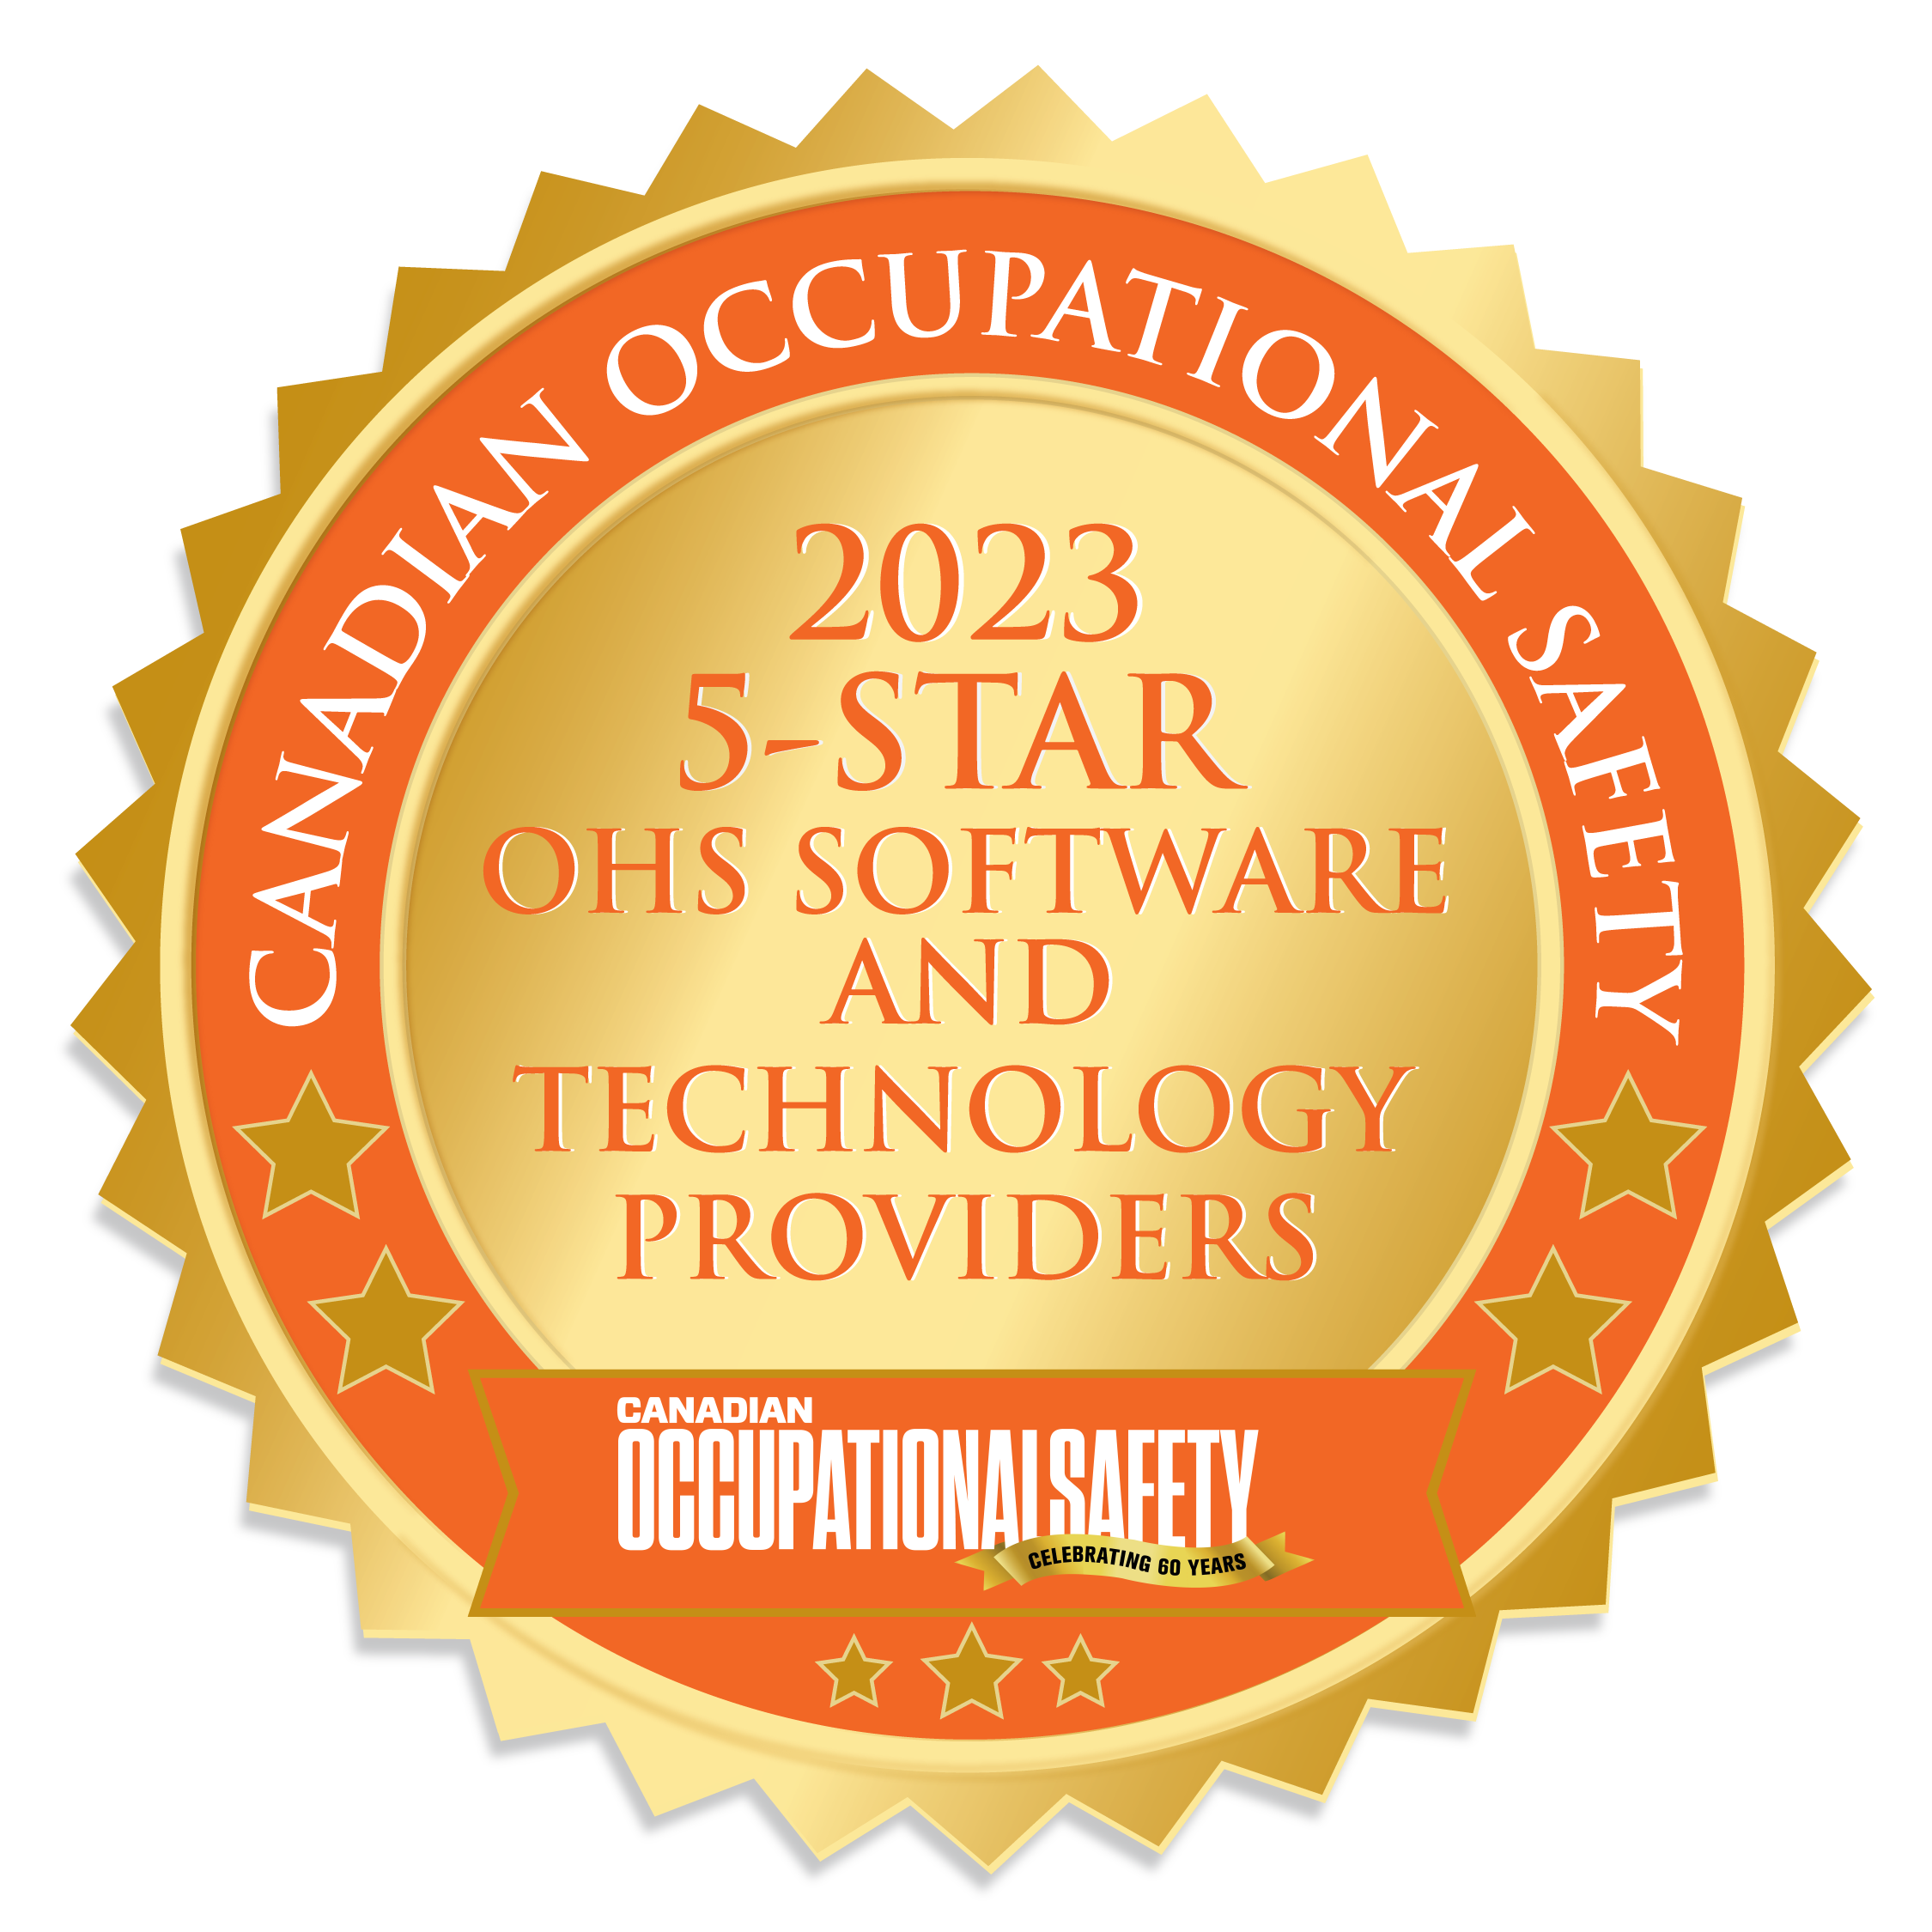 The Best Safety Audit Software in Canada | 5-Star OHS Software and Technology Providers 2023